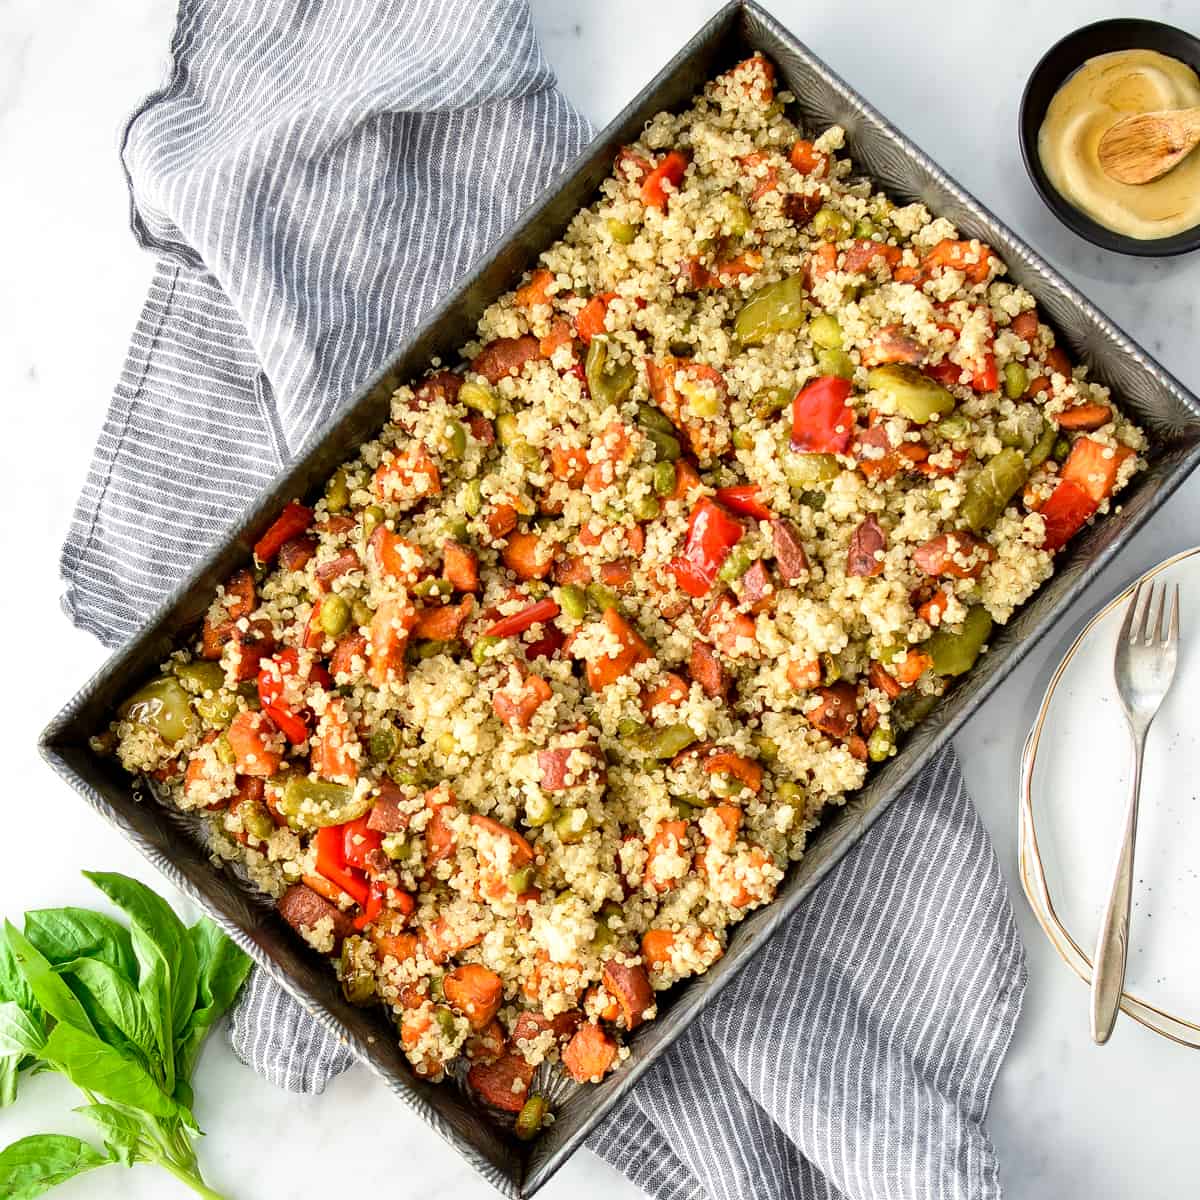 Overhead view of Roasted Vegetable Quinoa Salad in the baking pan